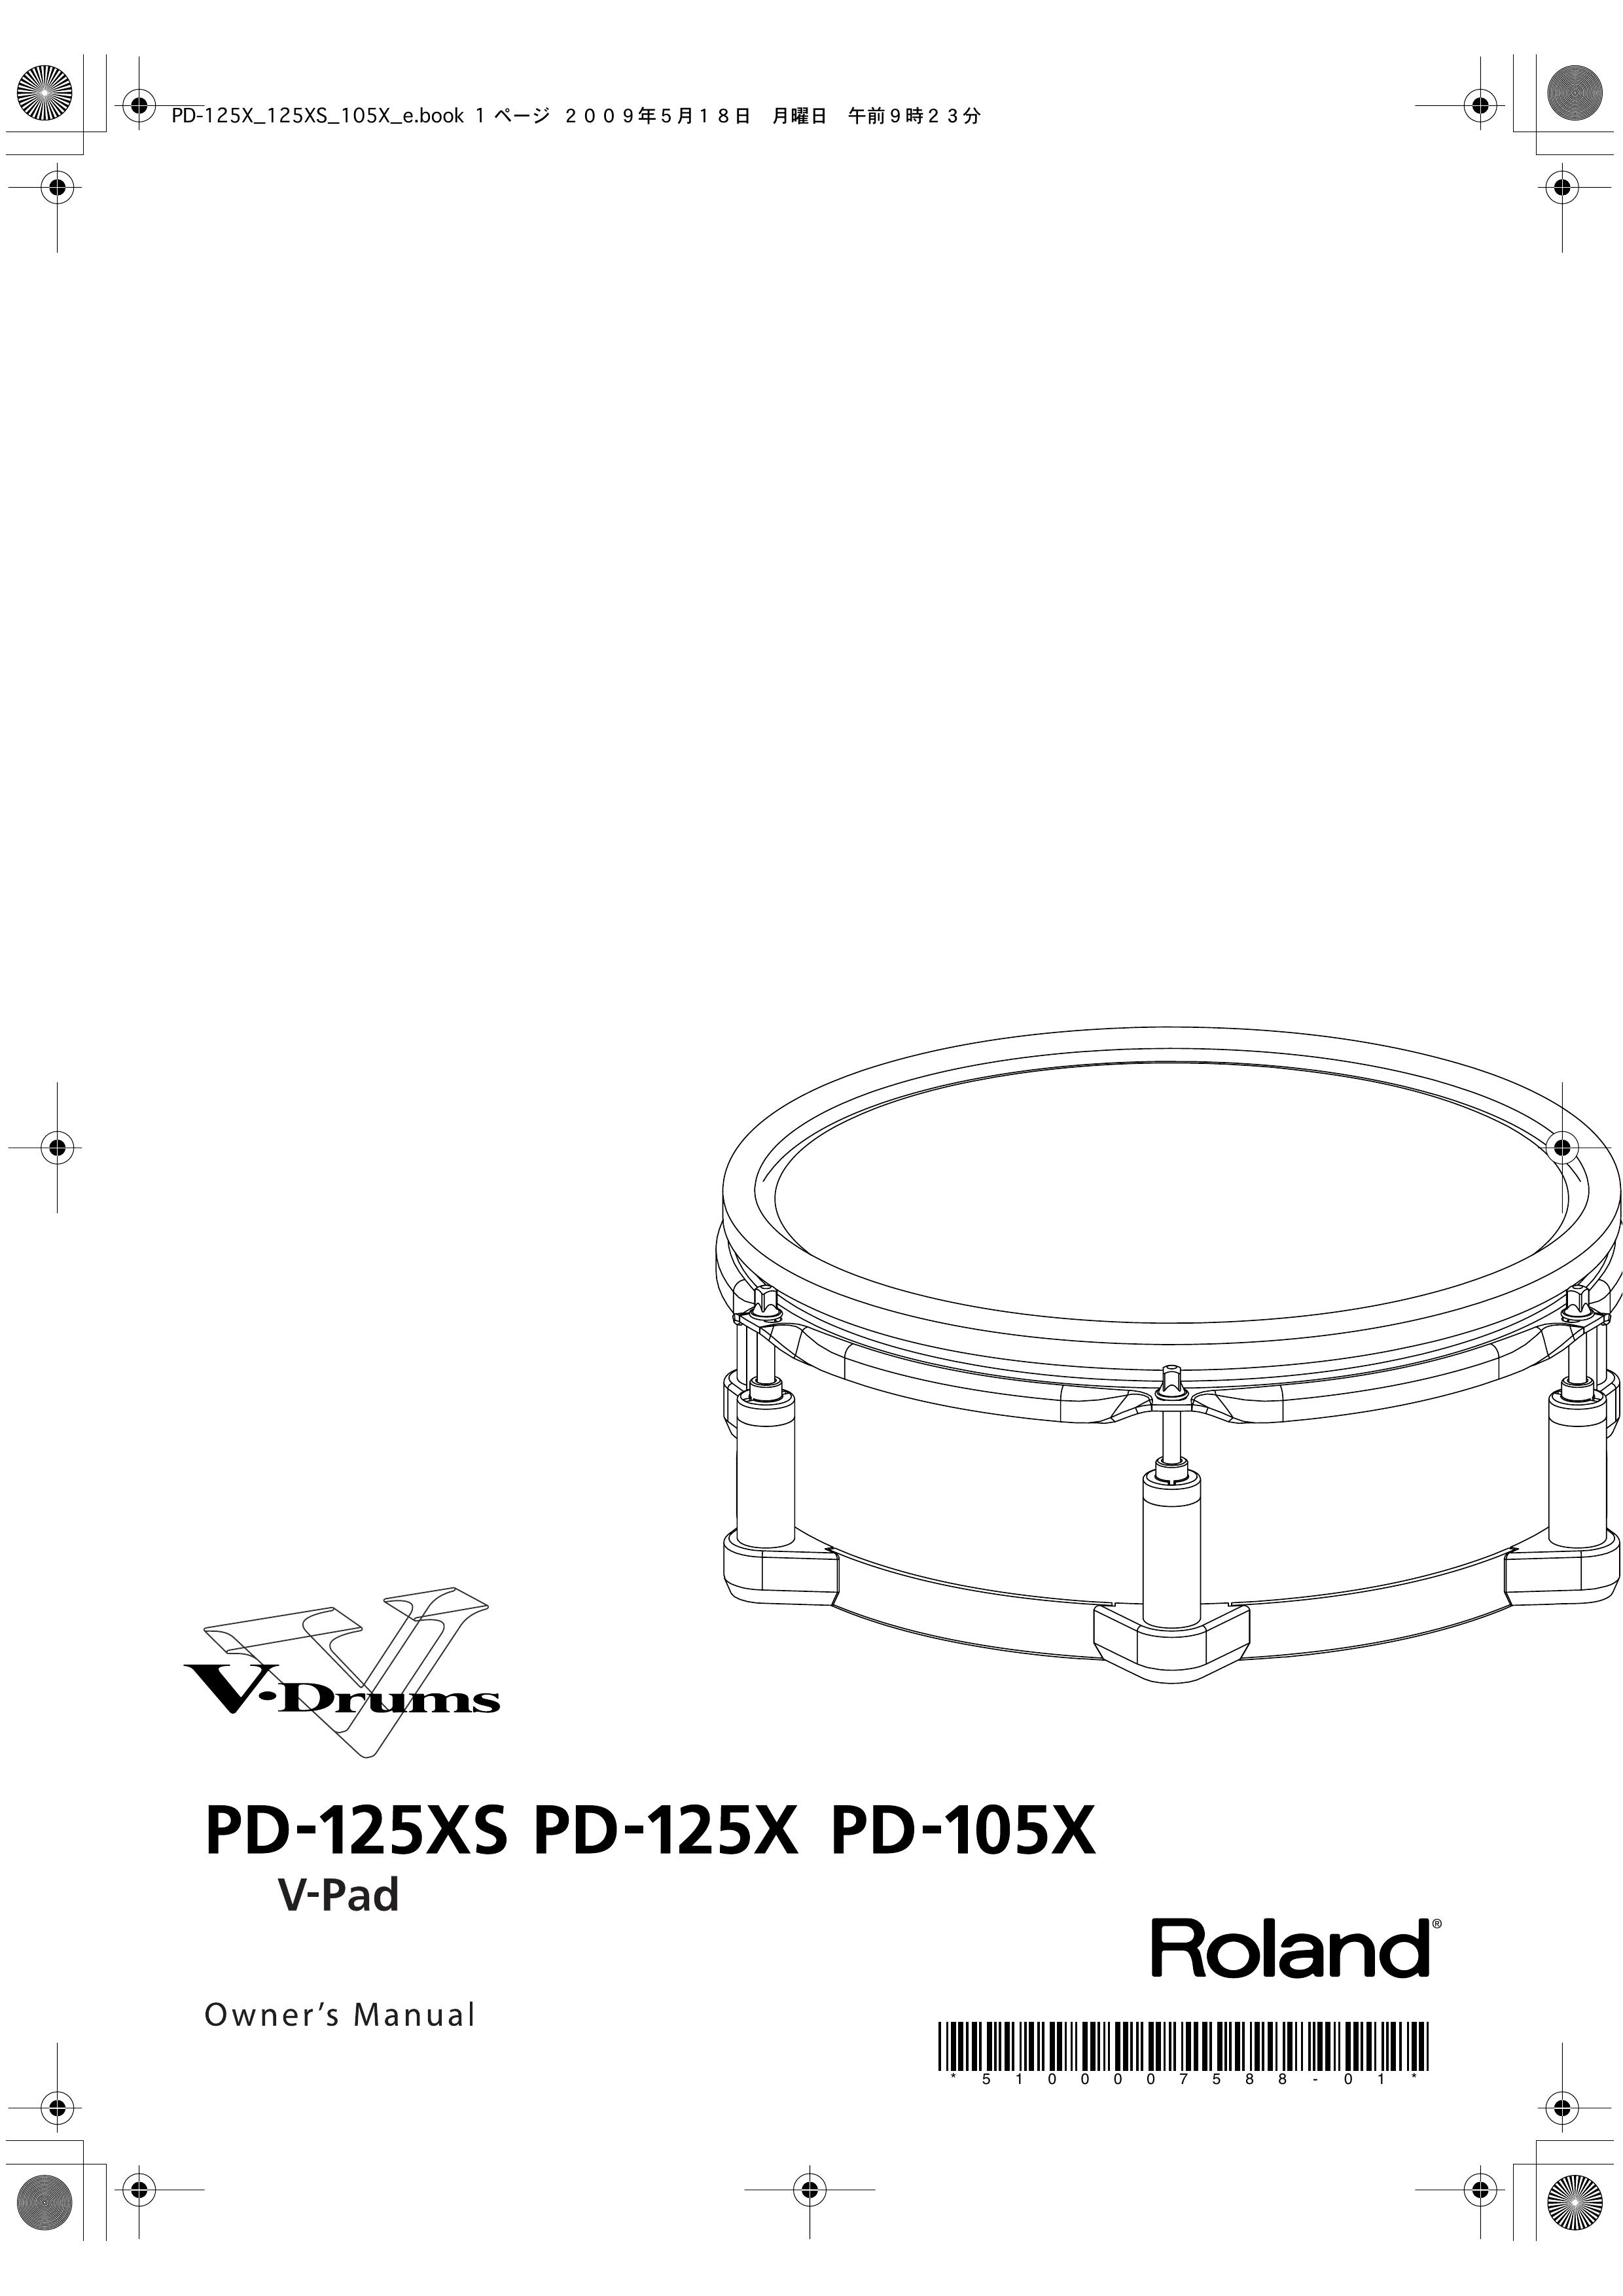 Roland PD-105X Drums User Manual